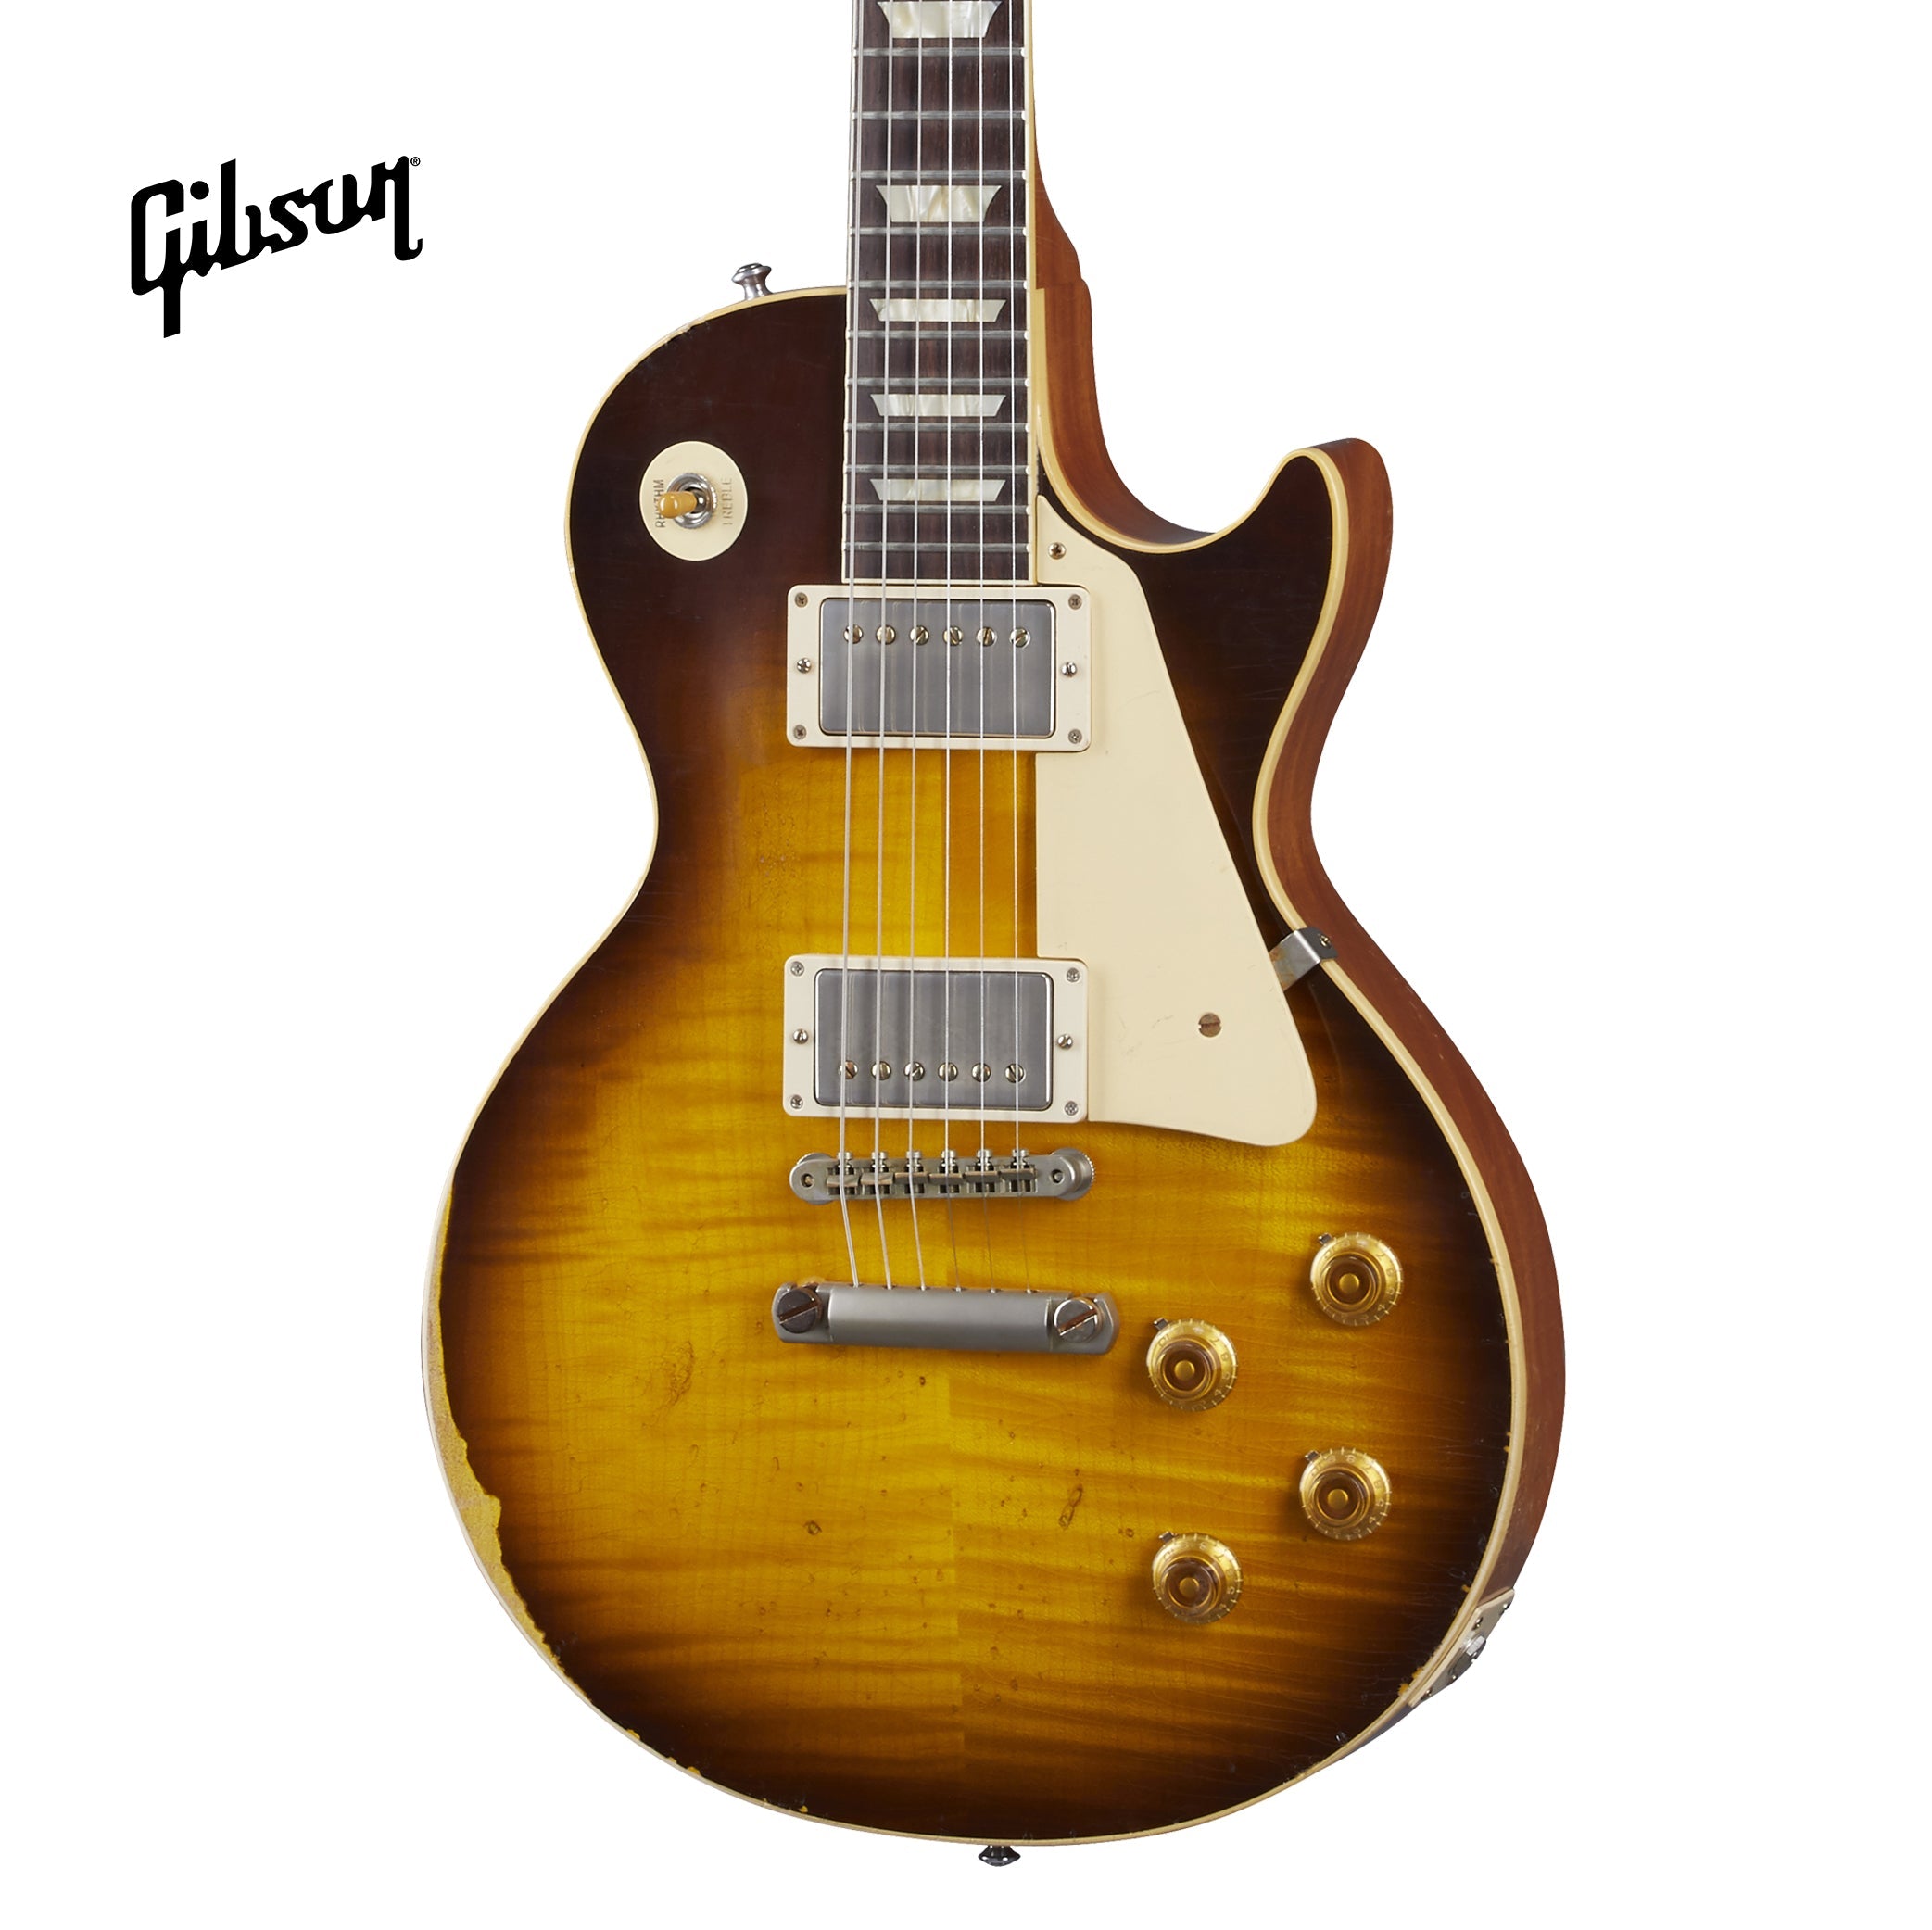 GIBSON 1959 LES PAUL STANDARD REISSUE ULTRA HEAVY AGED ELECTRIC GUITAR - KINDRED BURST